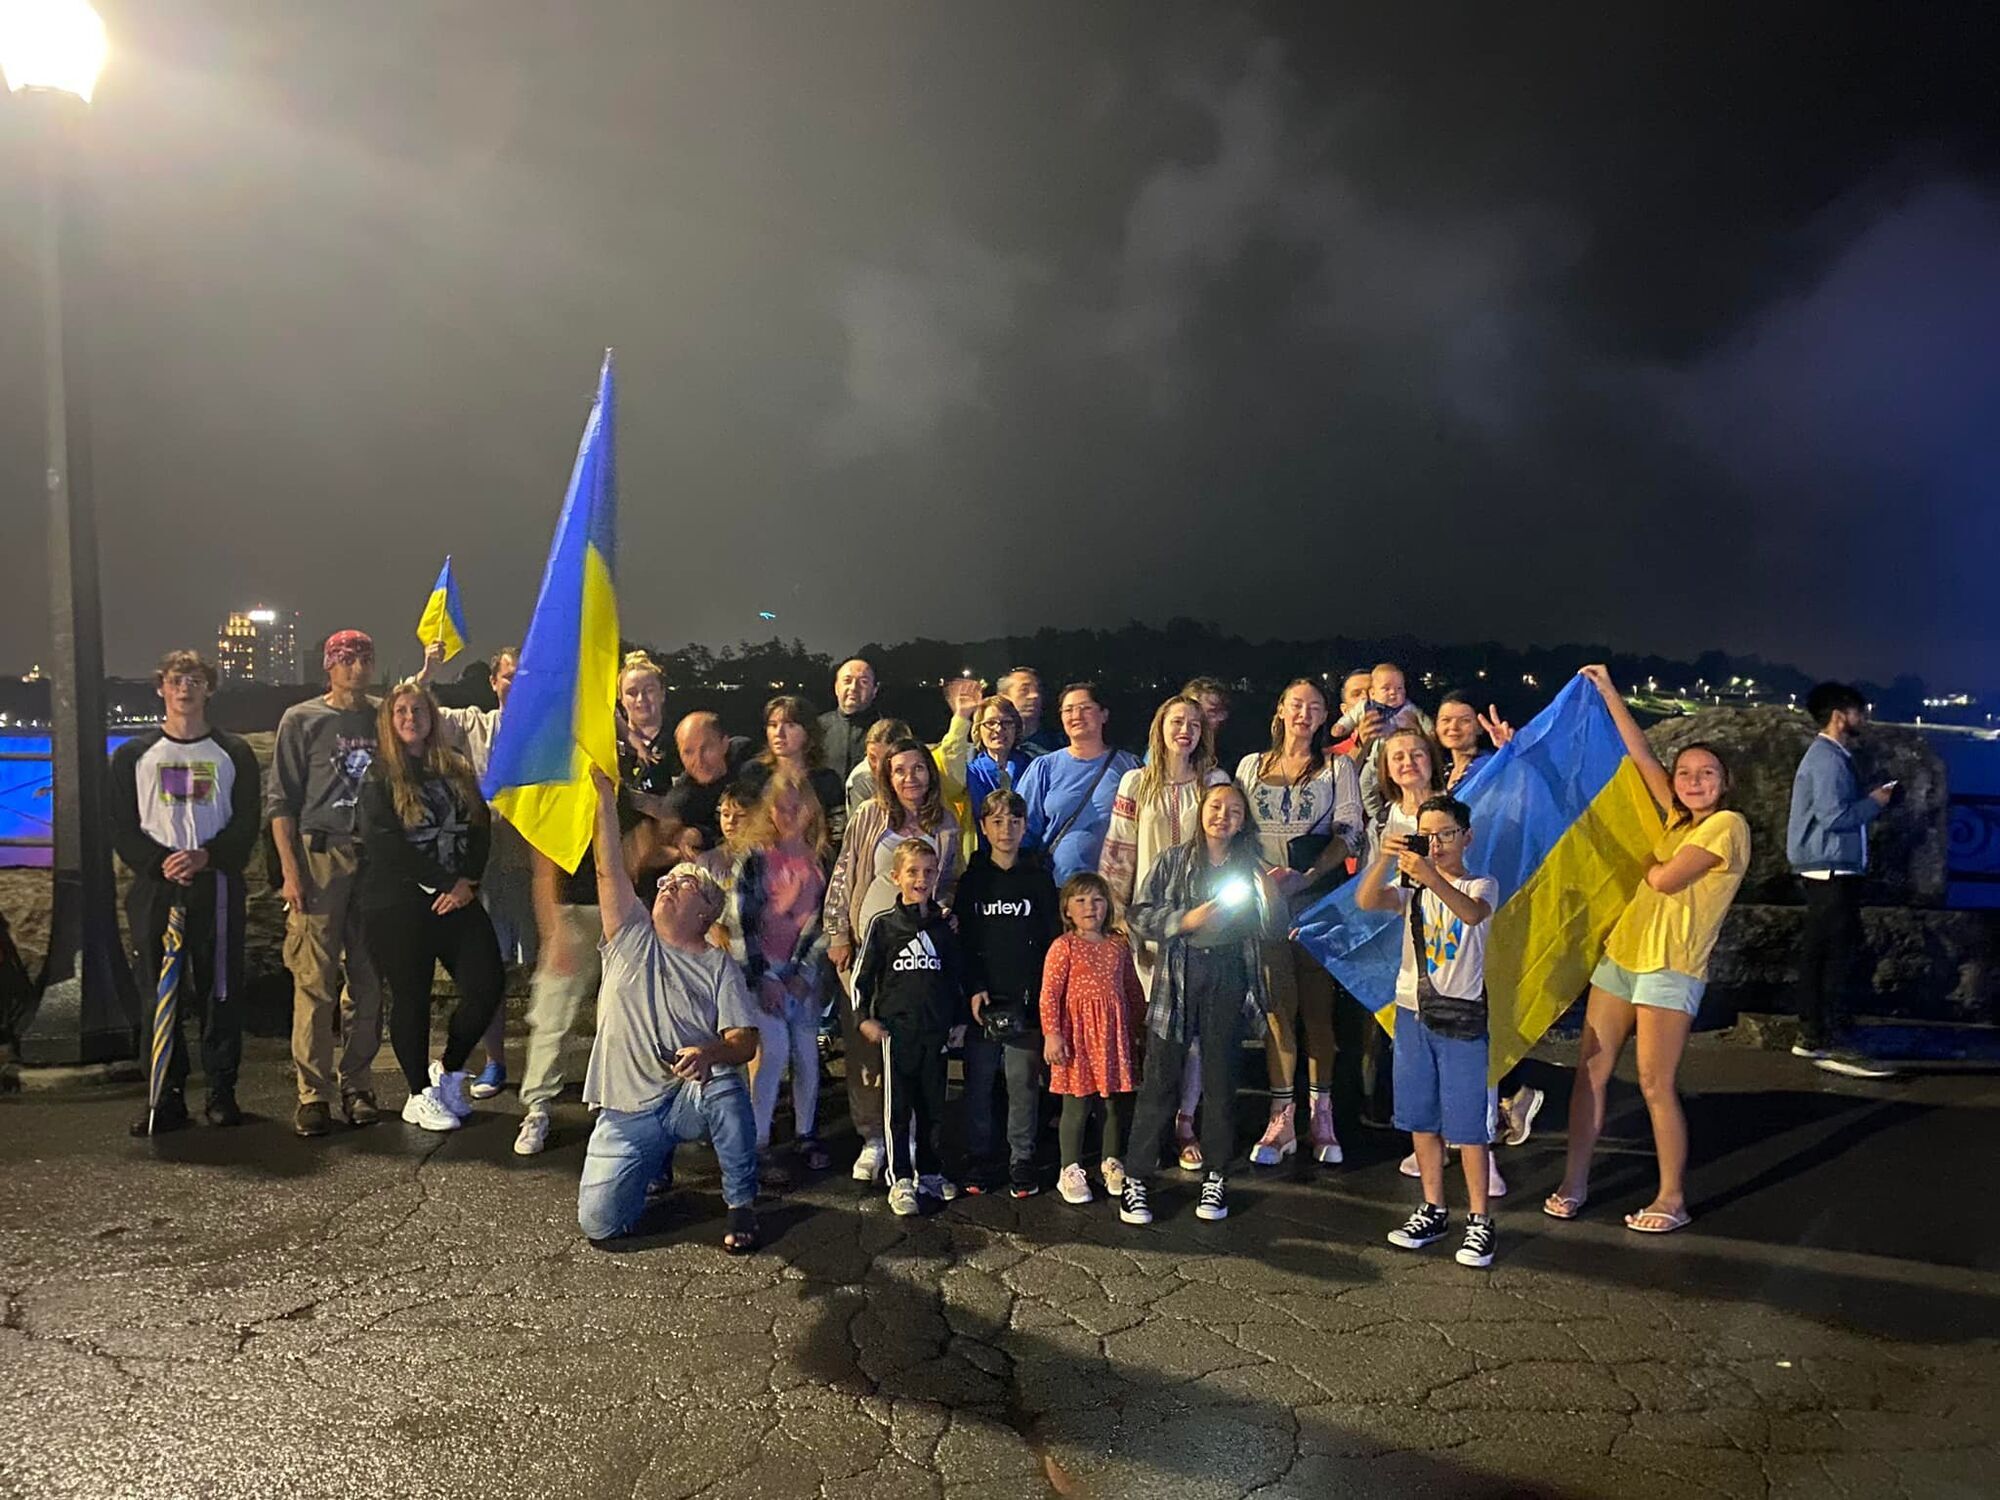 Ukrainians approach Niagara with blue and yellow banners